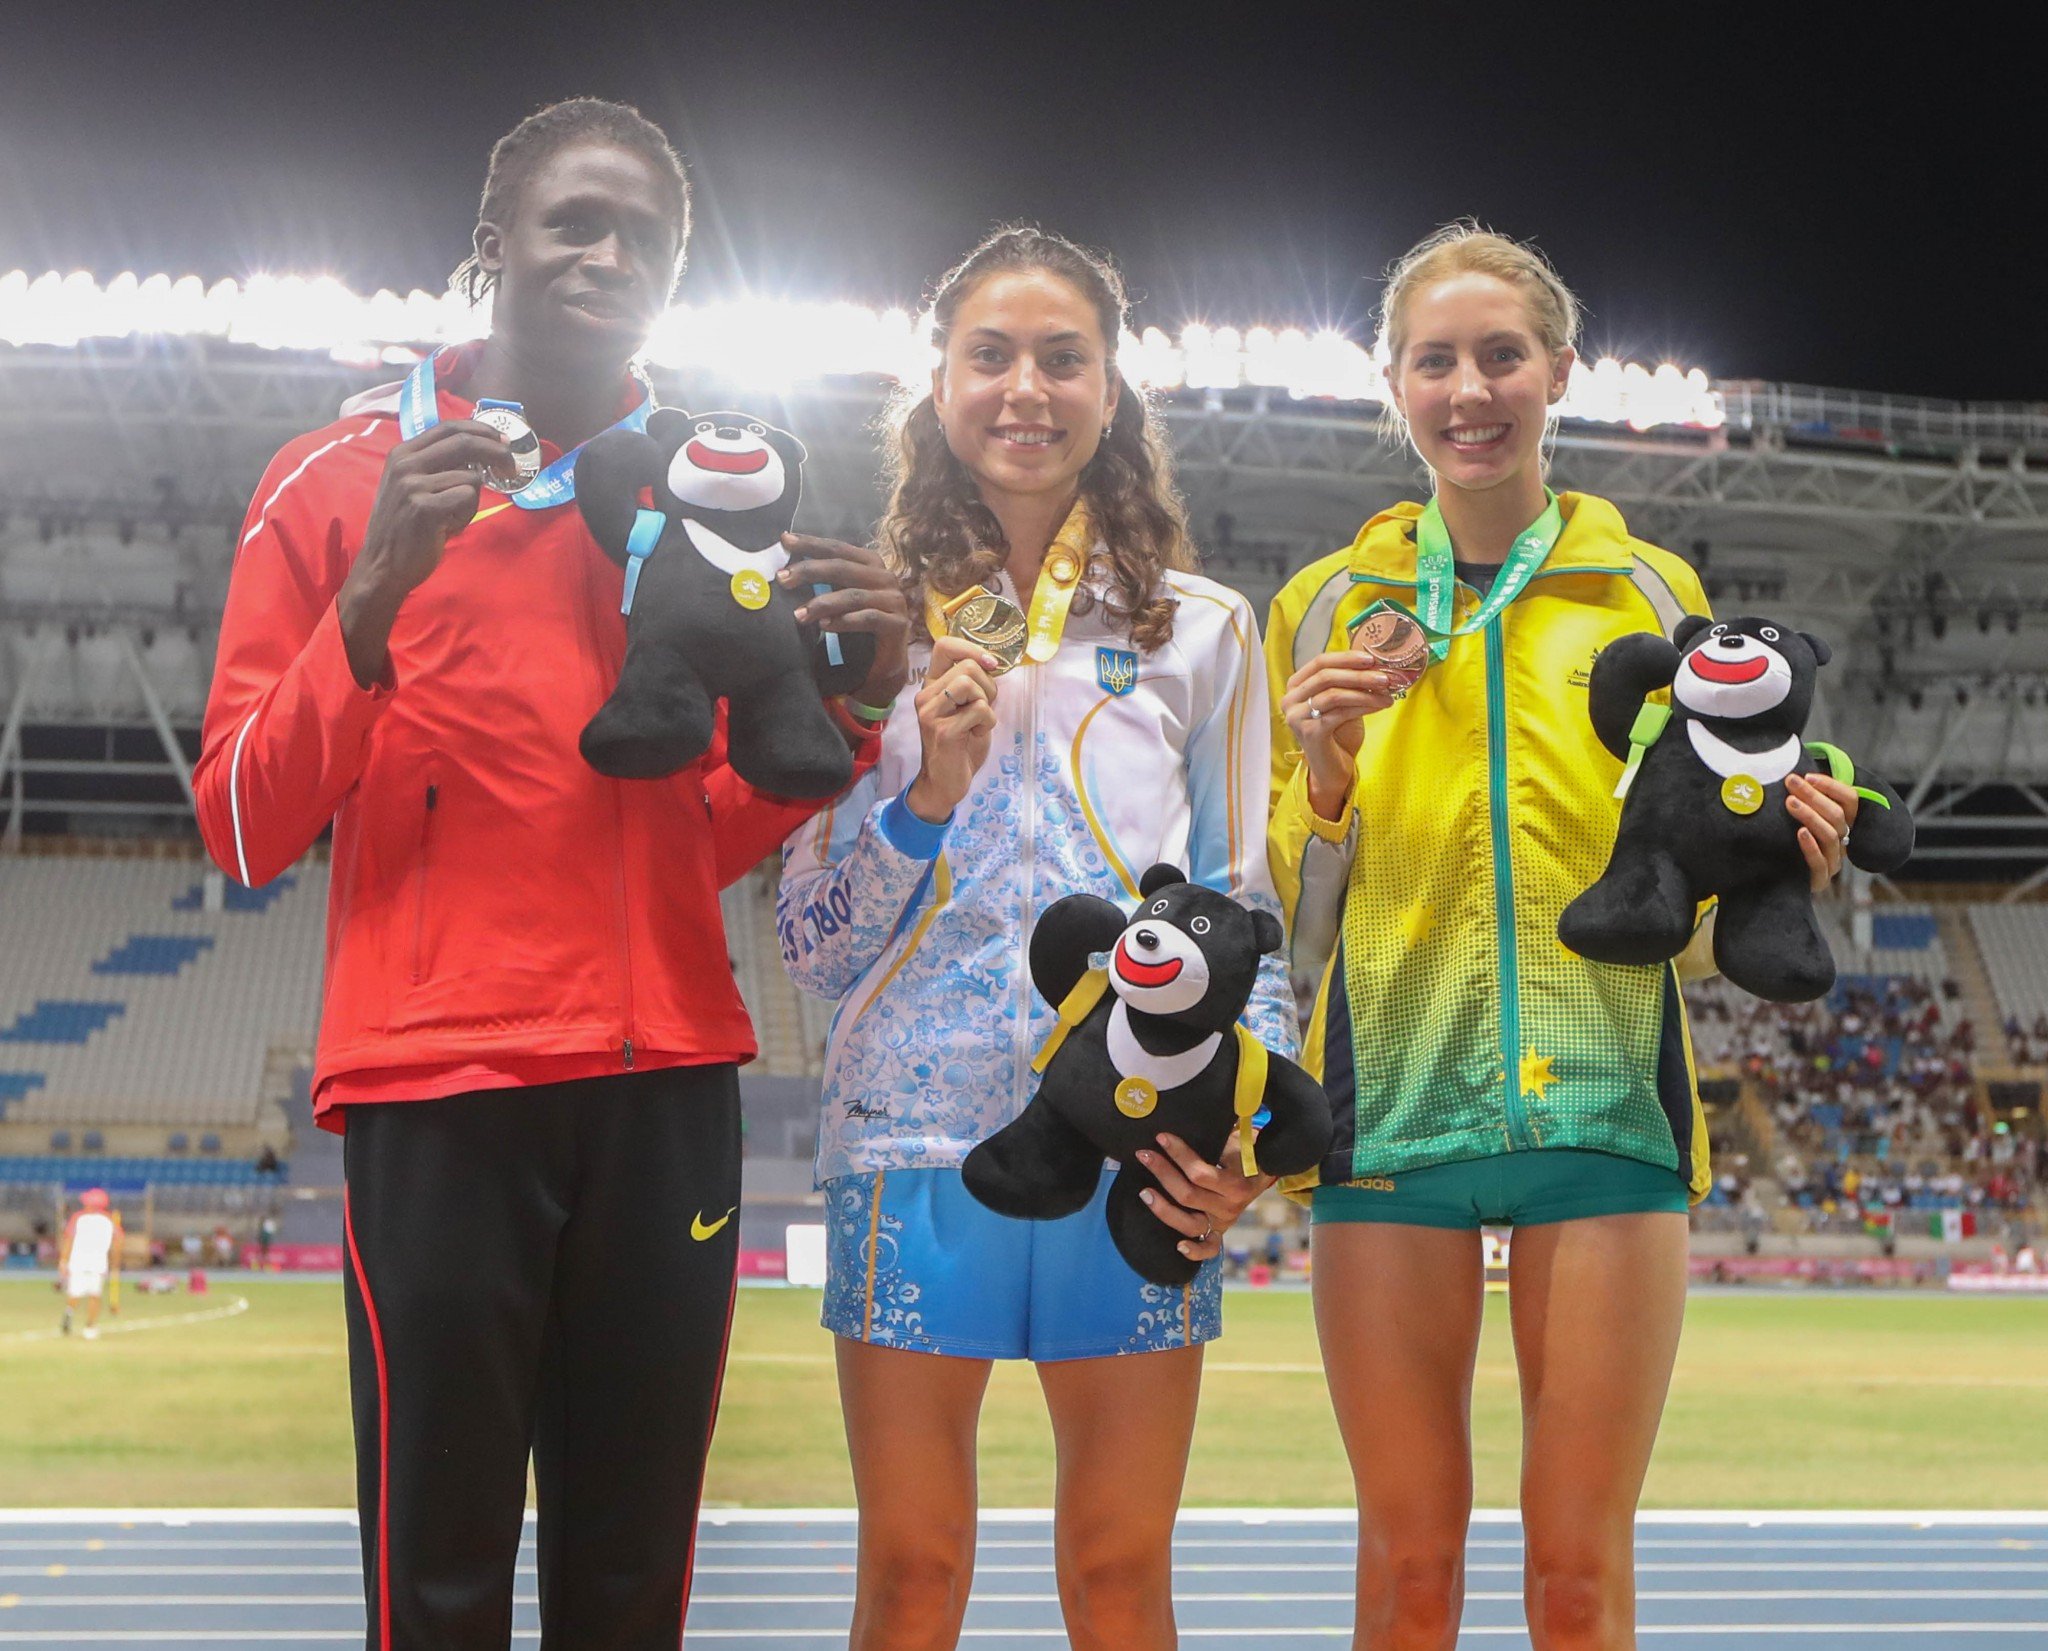 Olga Liakhova, centre, received the women's 800m gold at the medal ceremony before Cuba’s Rose Almanza Blanco was reinstated ©Taipei 2017